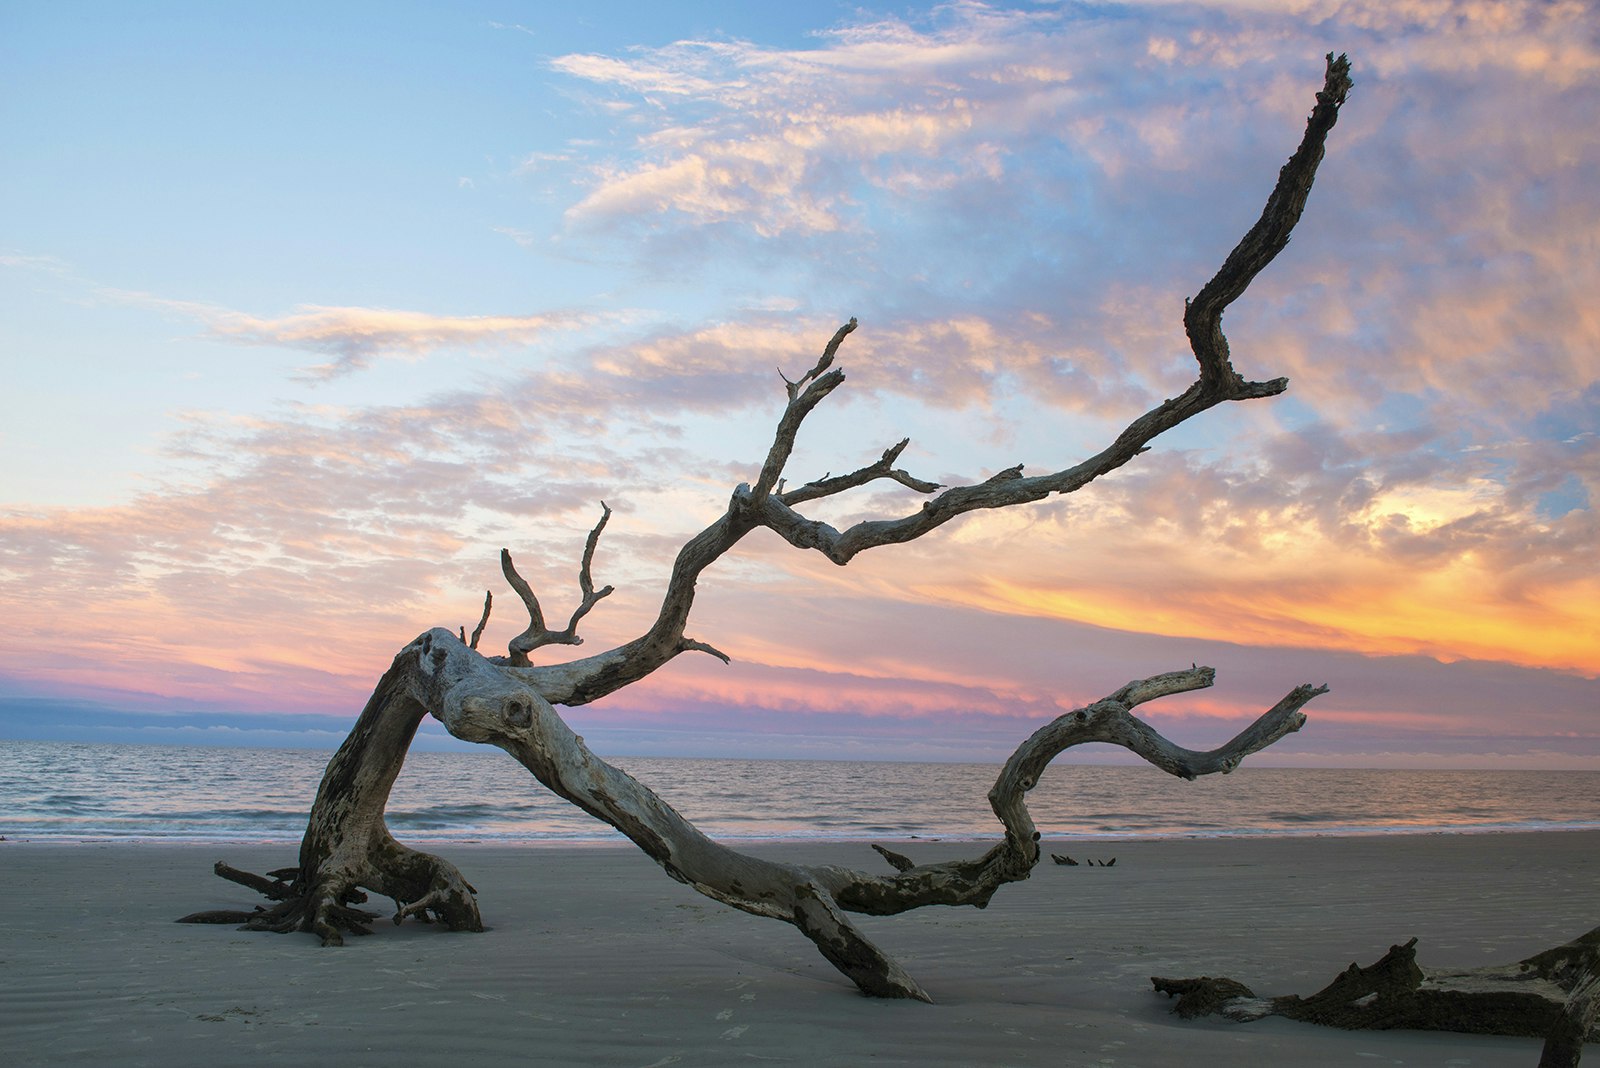 A branch lies on the beach at sunset on Driftwood Beach in Jekyll Island © Christian Herb